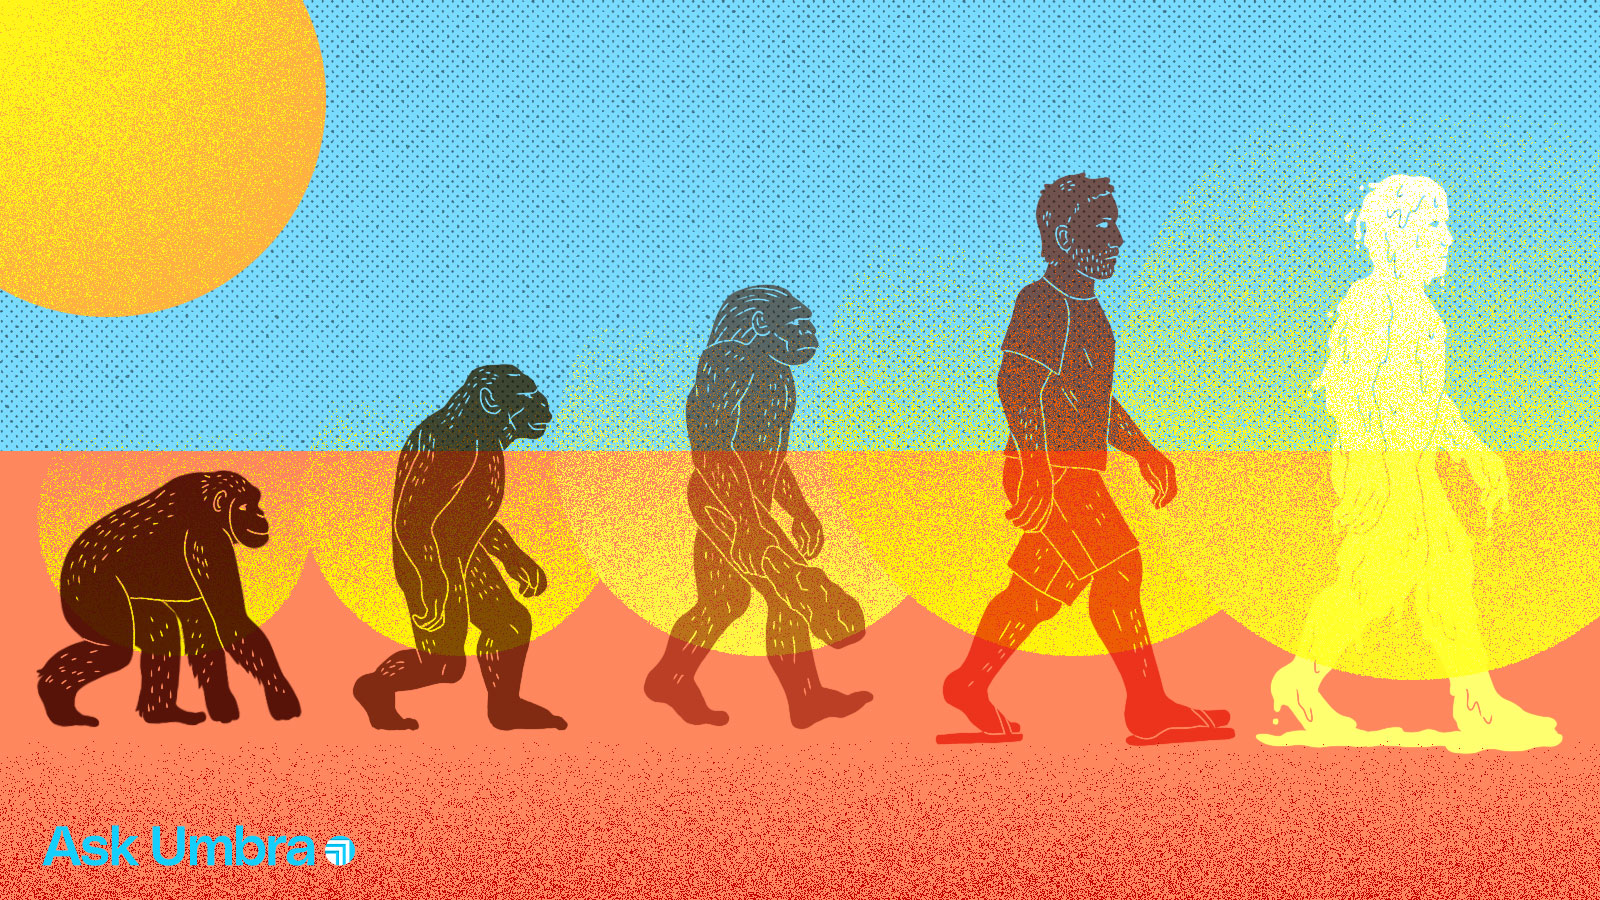 Illustration: a take on the Evolution of Man with an added melting human silhouette